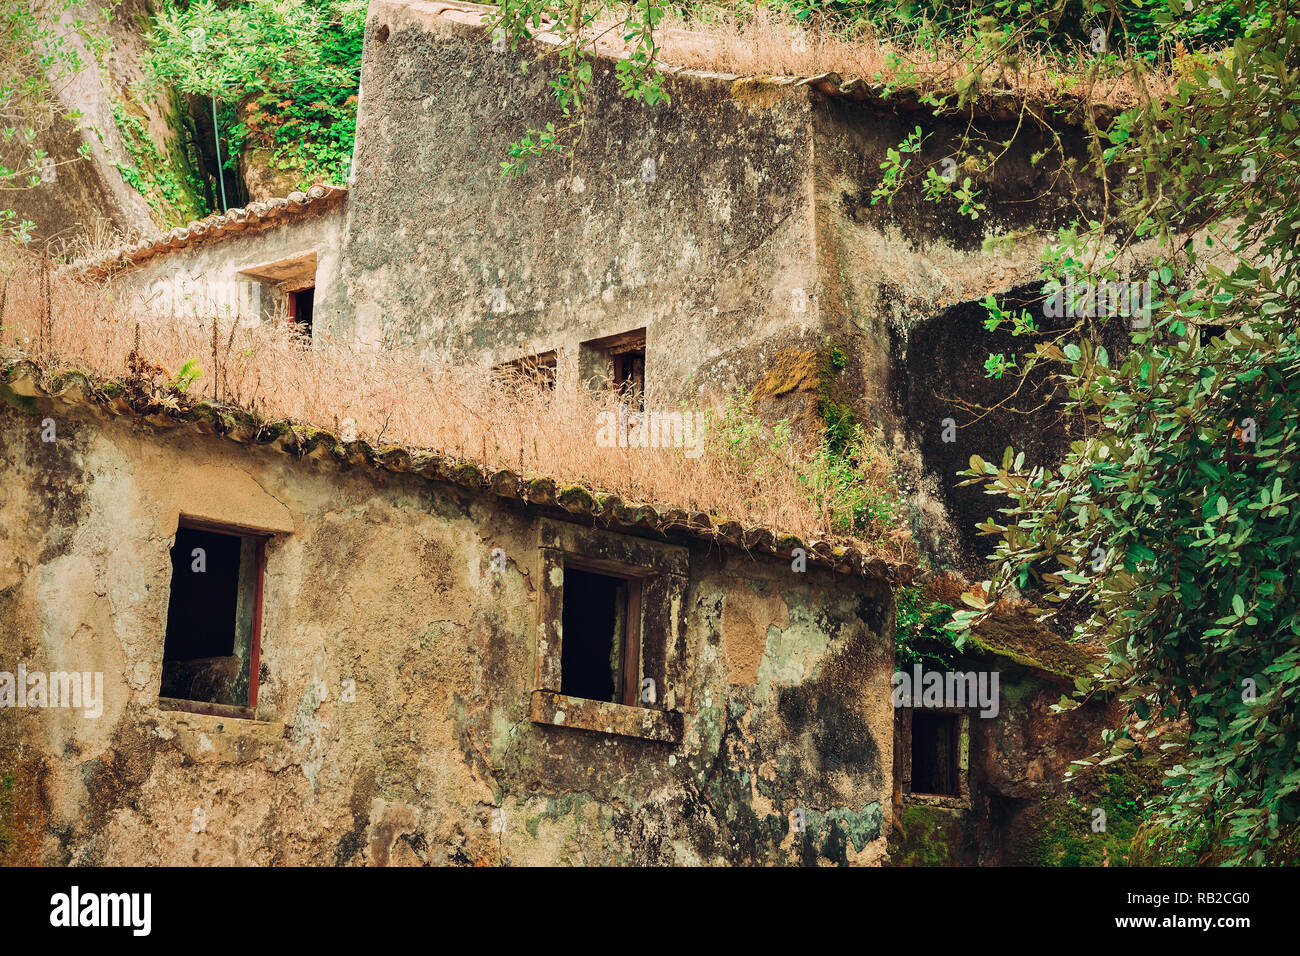 Convent of the Capuchos, Sintra, Portugal, religion, monks Stock Photo -  Alamy